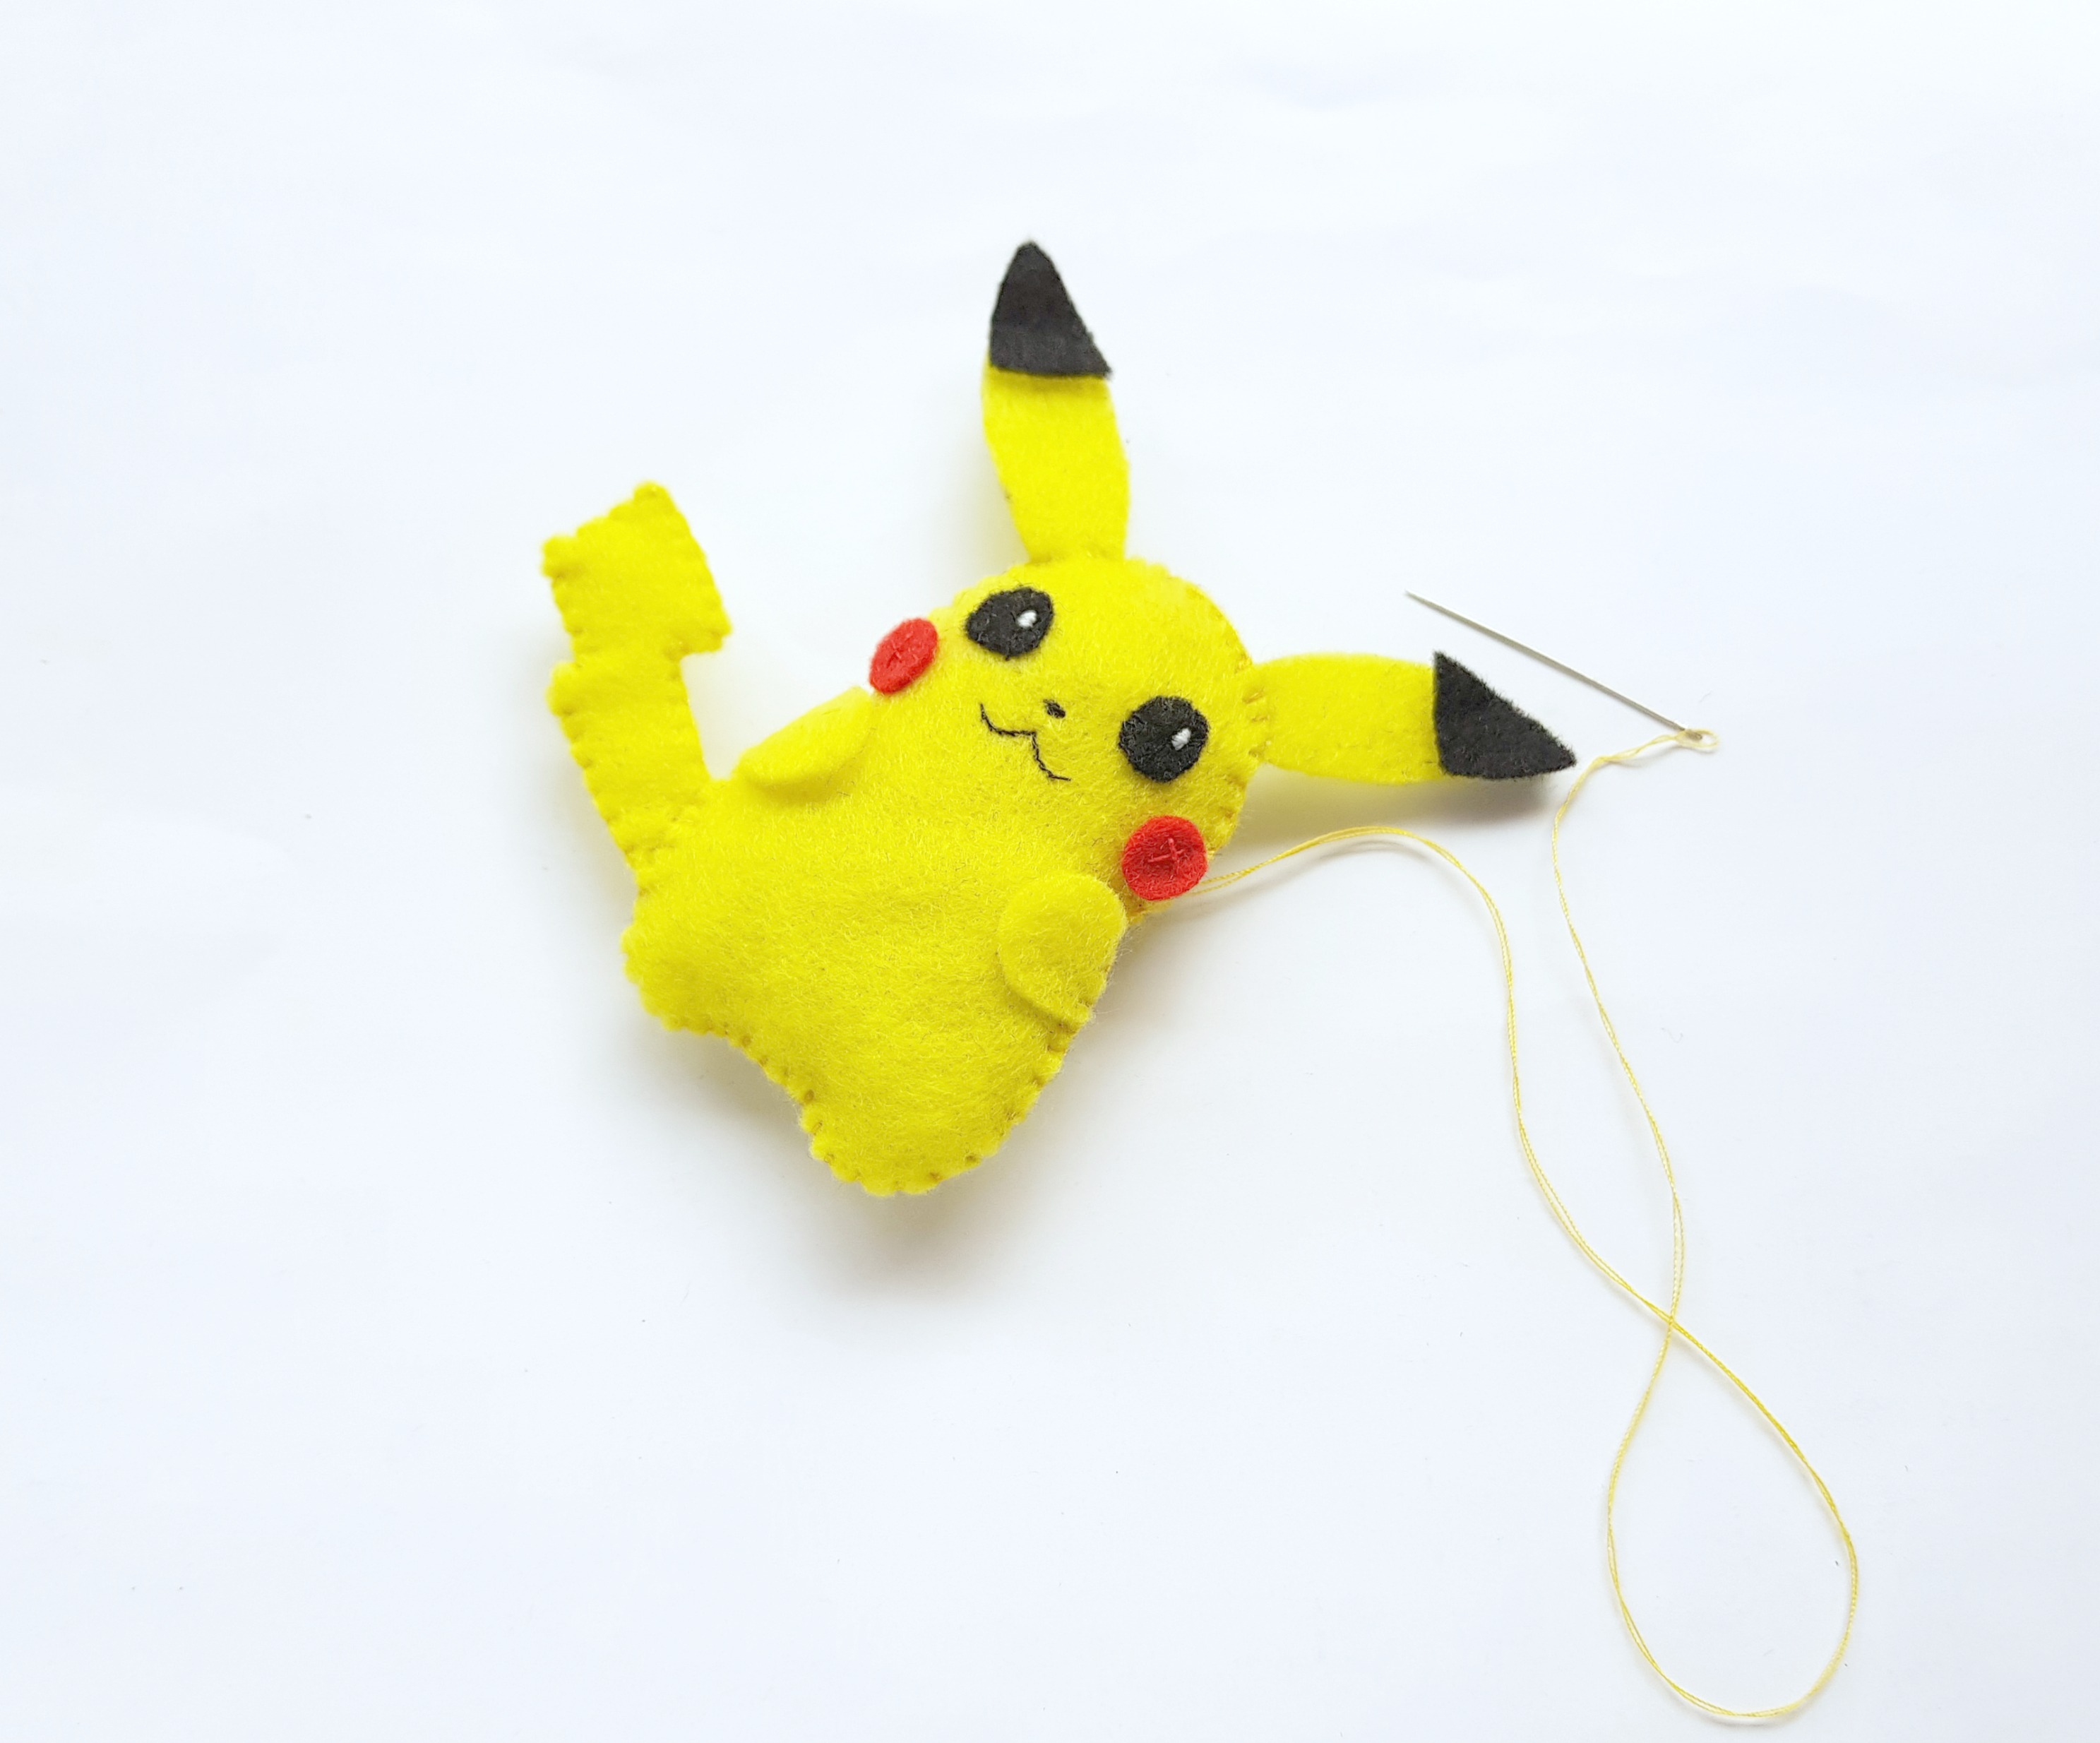 After you've stuffed Pikachu, it's time to seal him up. 